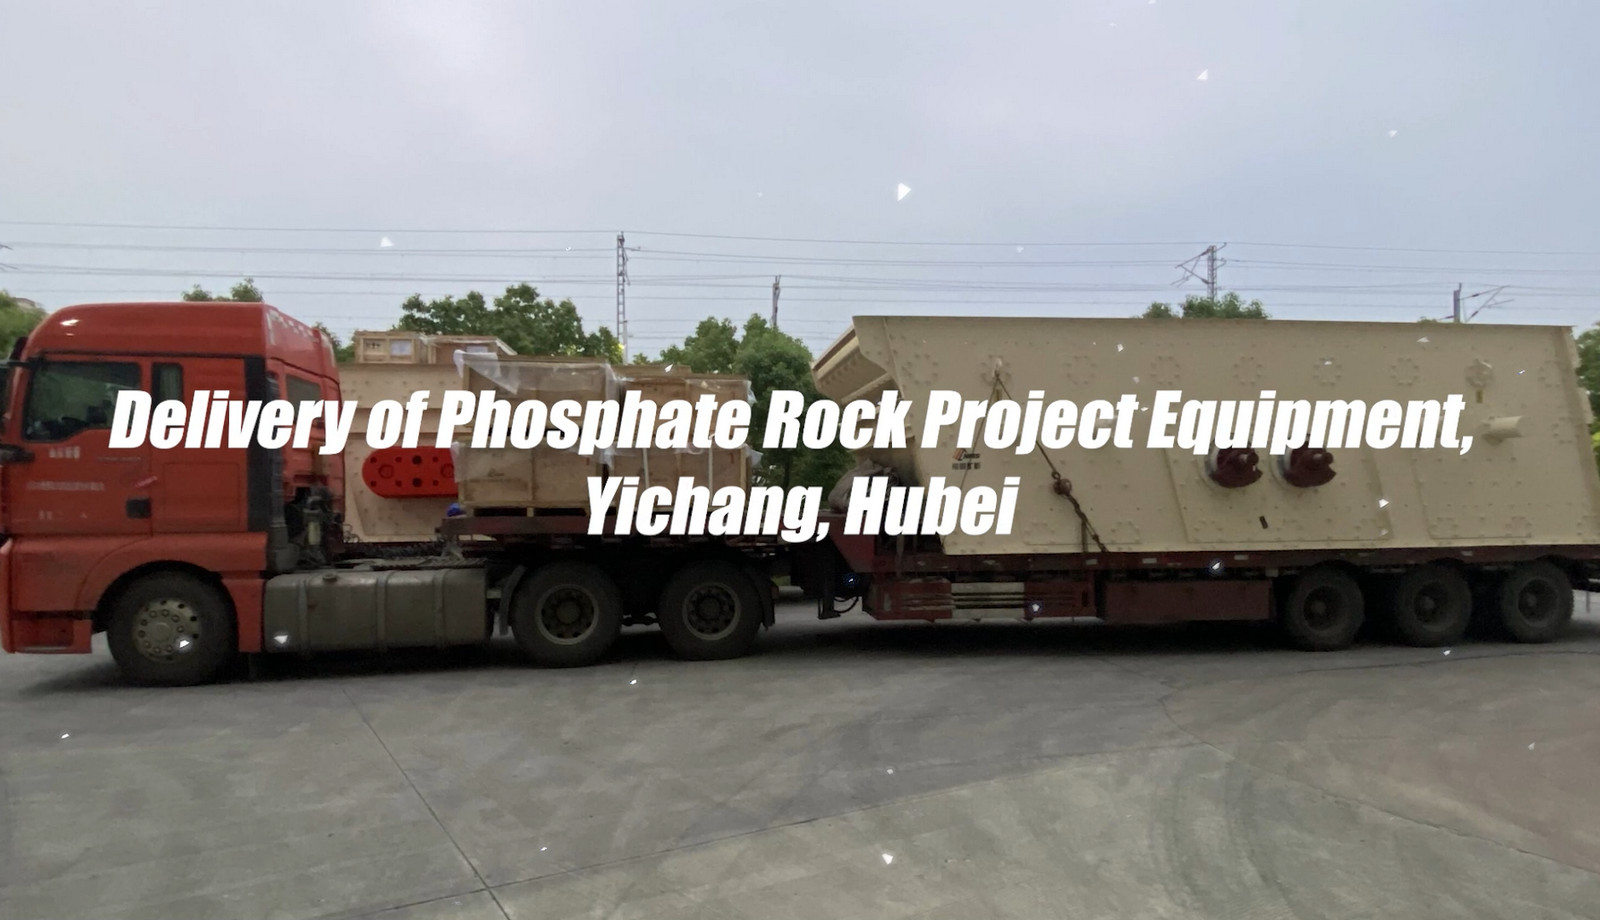 Delivery of Phosphate Rock Project Equipment, Yichang, Hubei